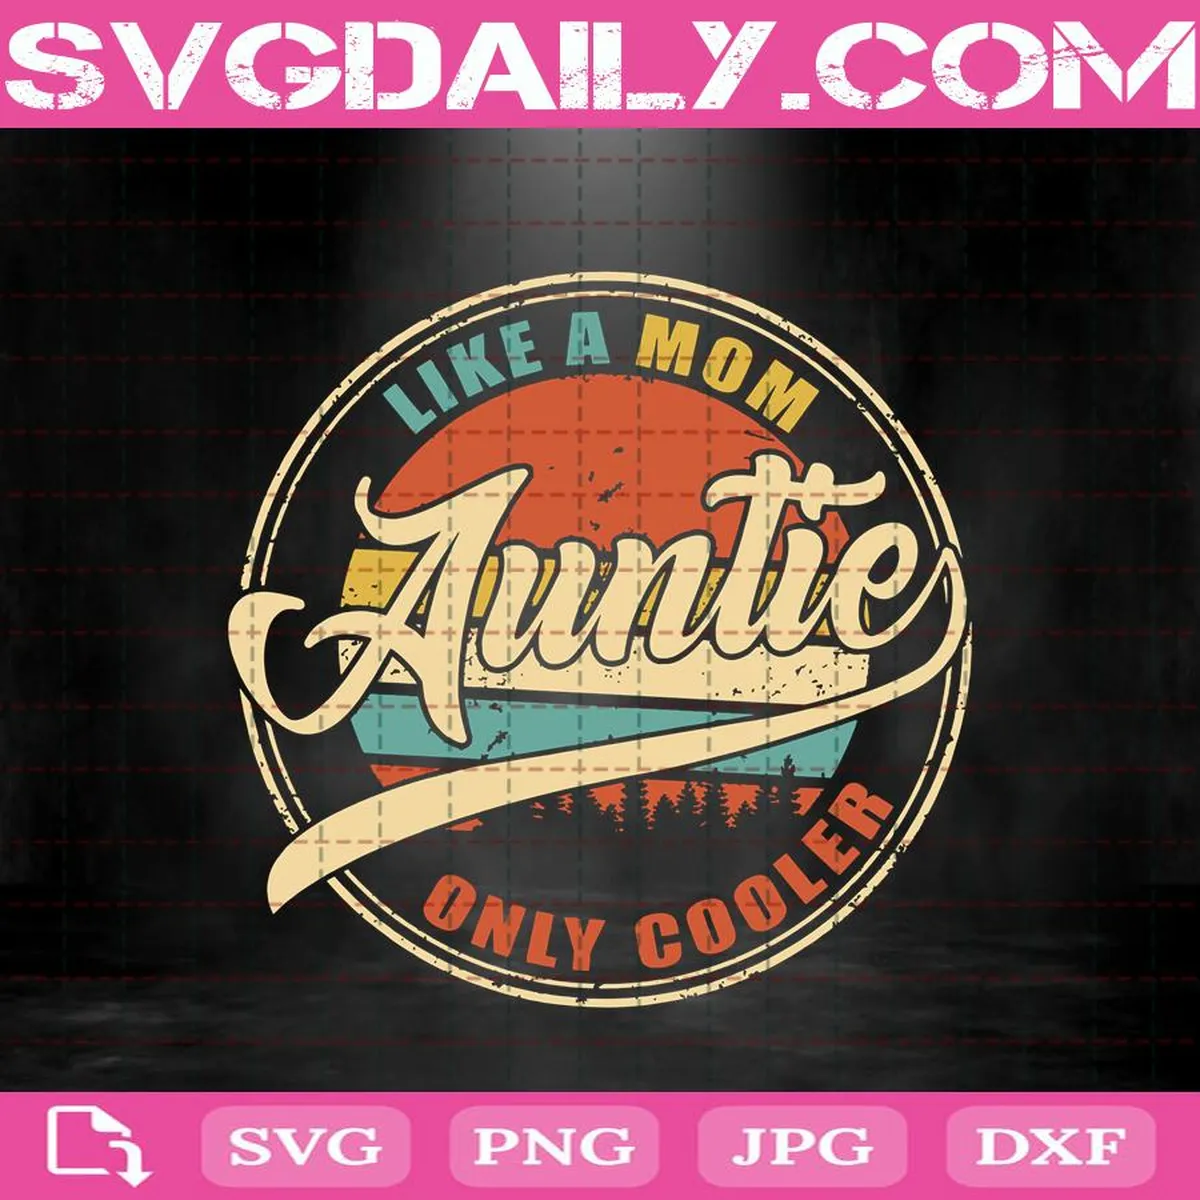 Auntie Like A Mom Only Cooler Svg, Auntie Quote Svg, Svg Dxf Png Eps Cutting Cut File Silhouette Cricut